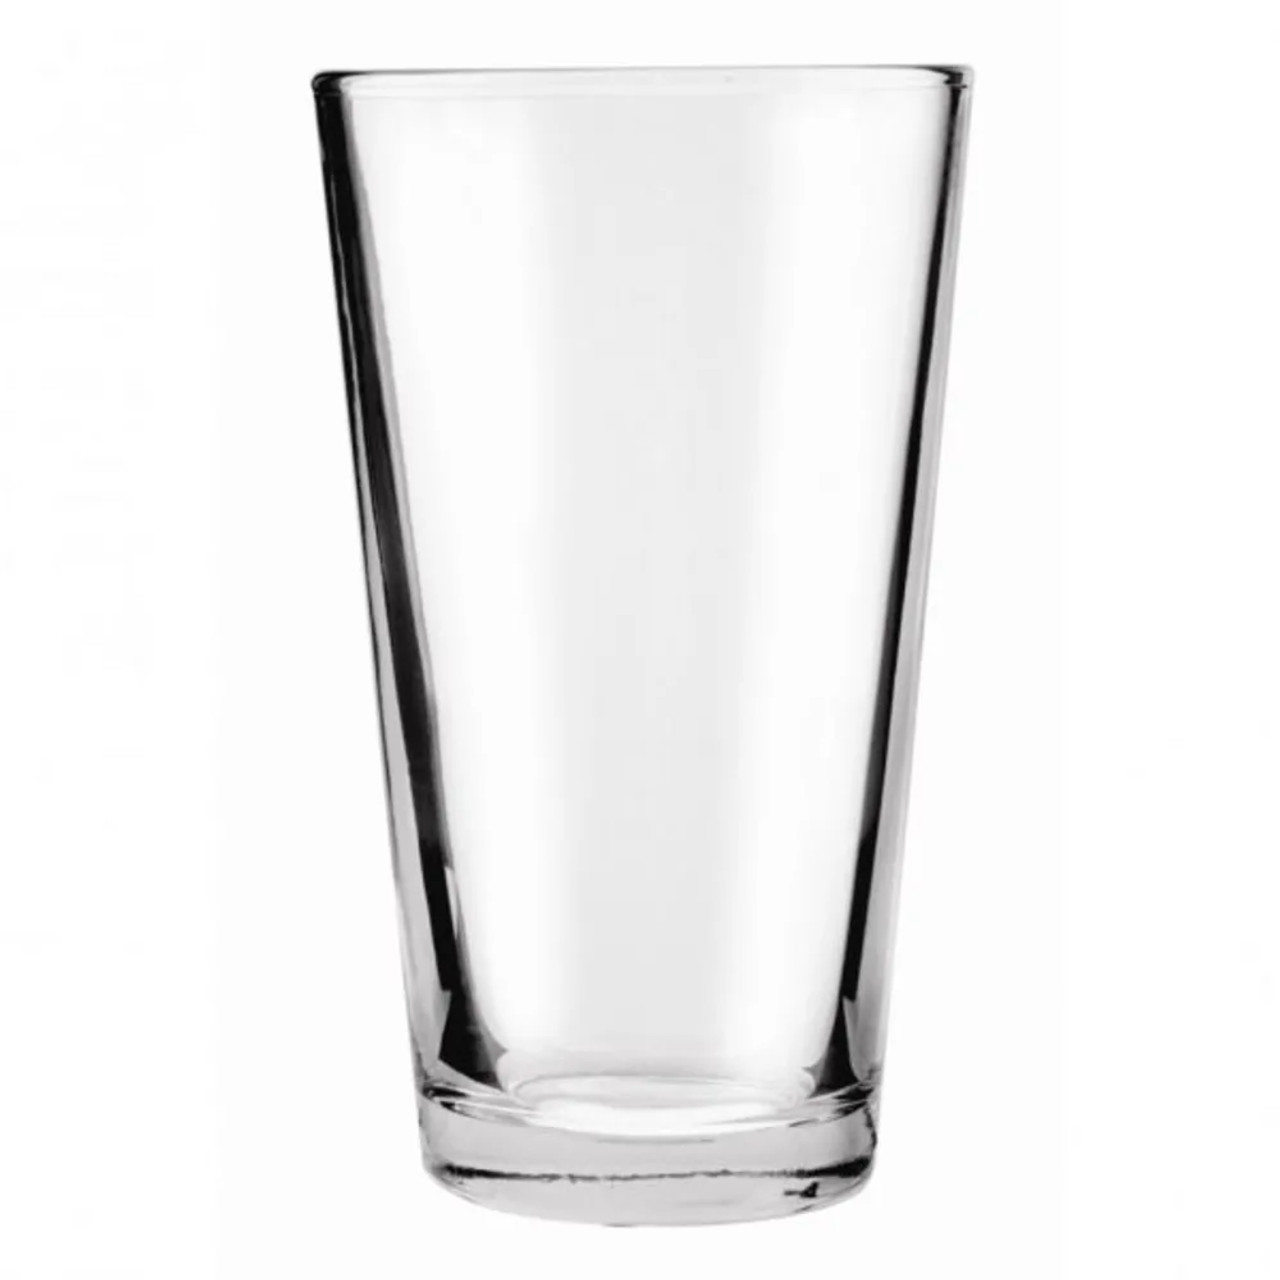 Anchor 176FU 16 oz Mixing Glass - Clear Glass, Sure Guard Guarantee (24/Case) - Chicken Pieces